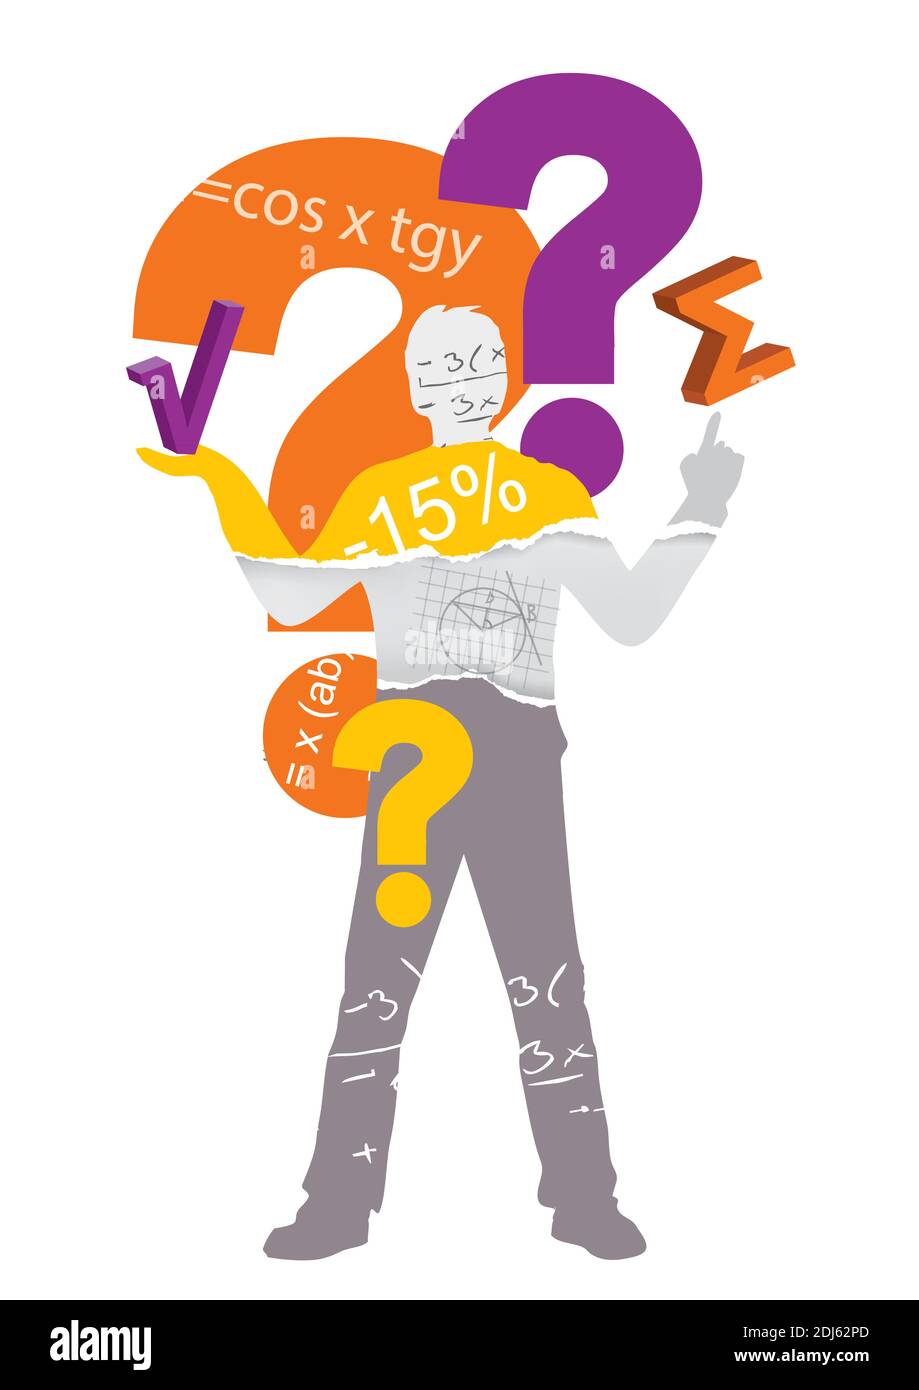 Mathematician, teacher, question mark. Illustration of stylized male silhouette with mathematical symbols and question marks. Vector available. Stock Vector